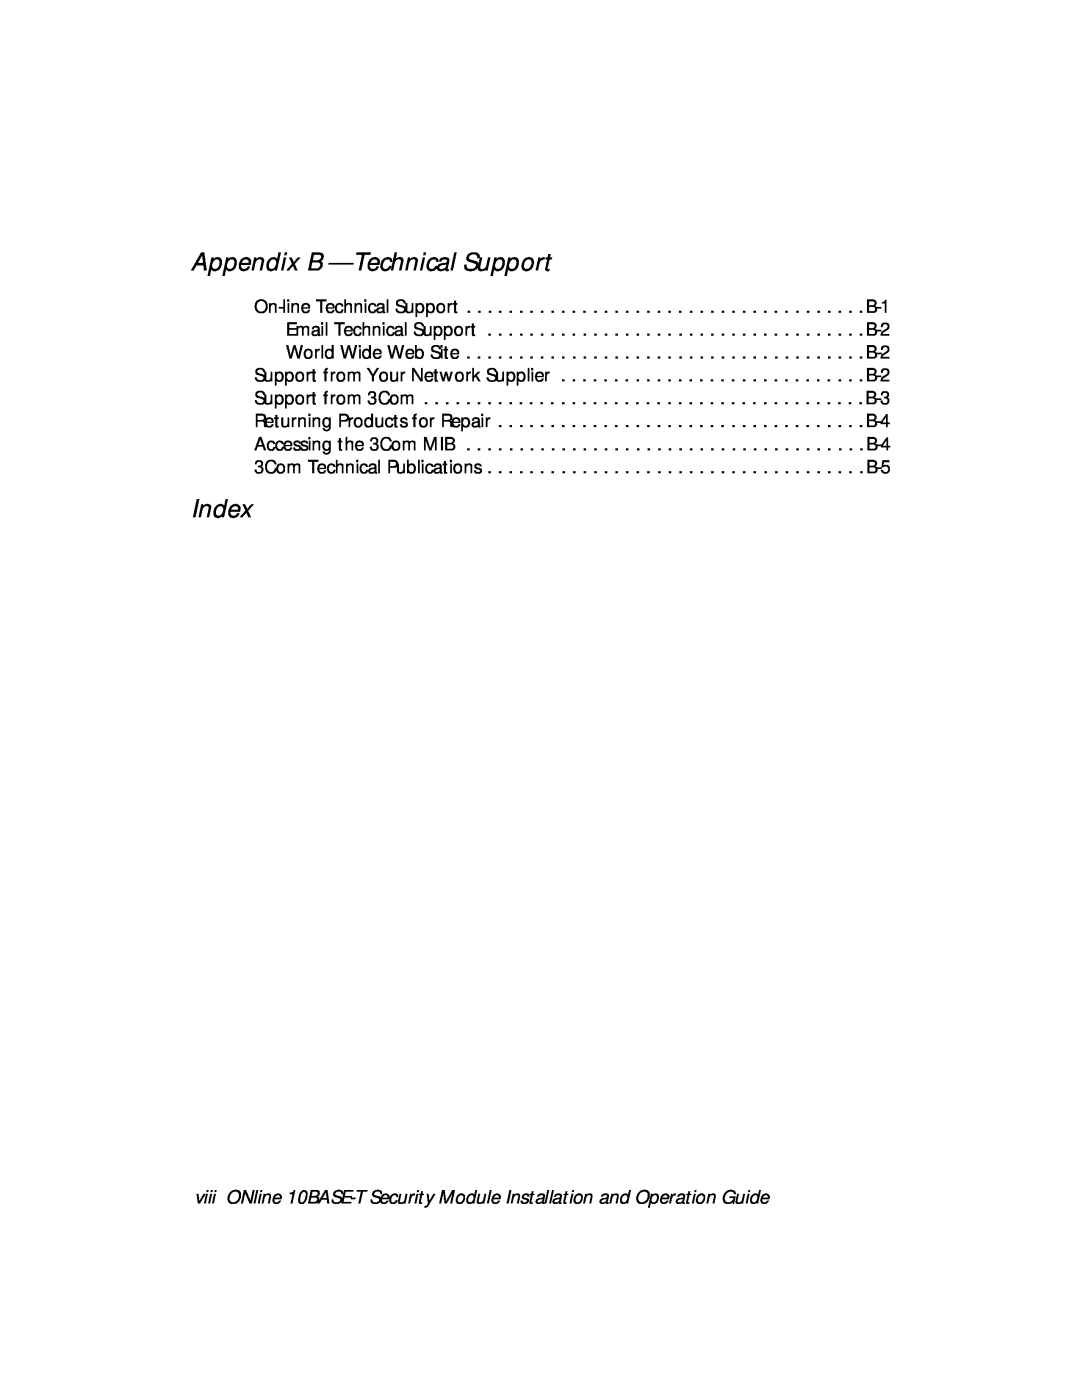 3Com 5112M-TPLS installation and operation guide Appendix B - Technical Support, Index 